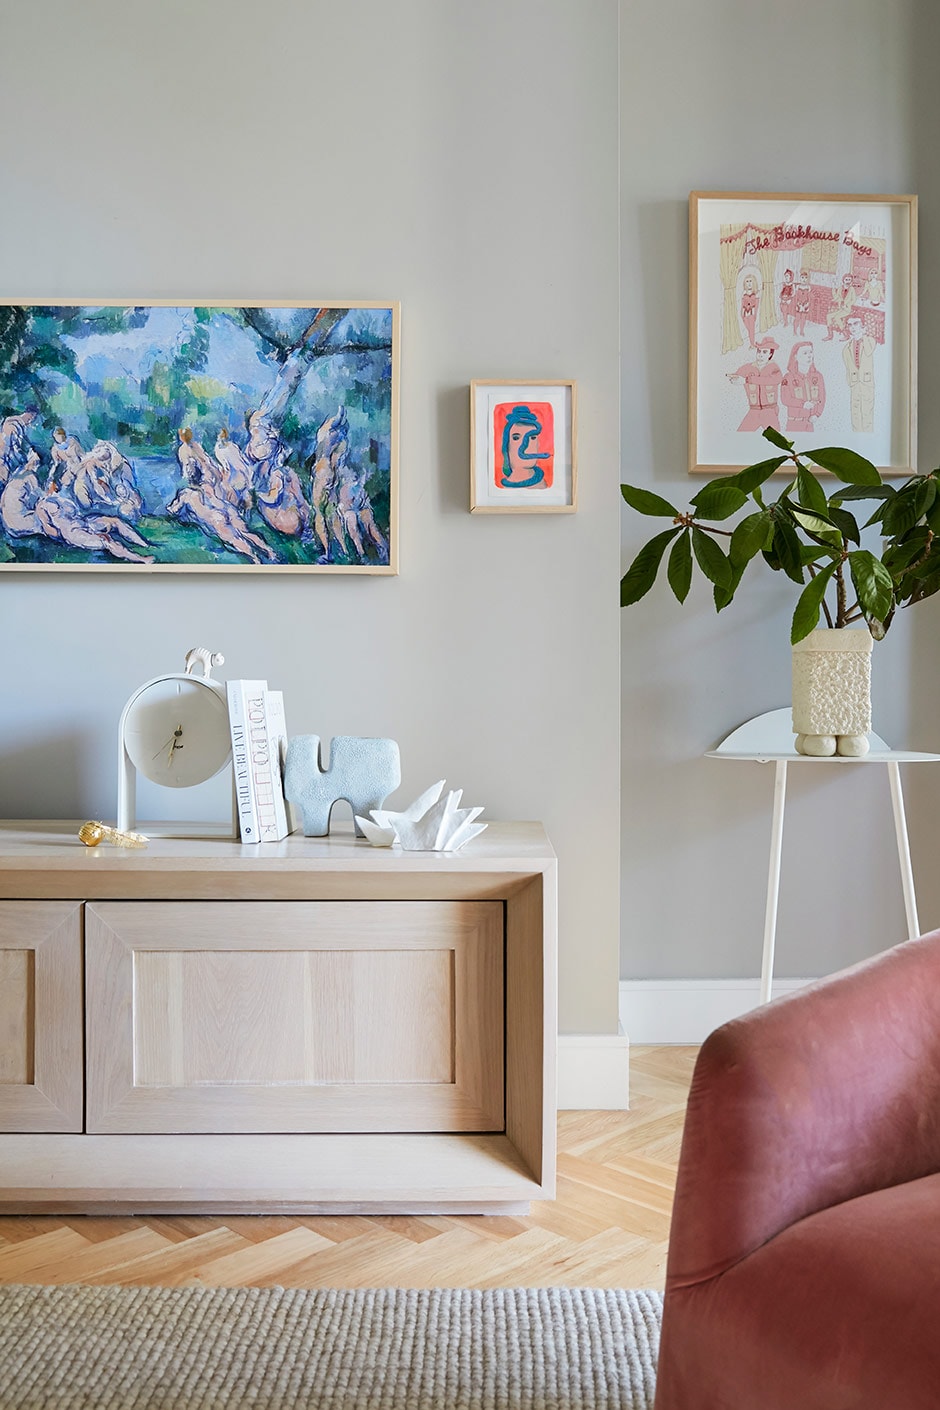 The magic happened slowly but surely at interior designer Jono Fleming’s small-space Sydney apartment